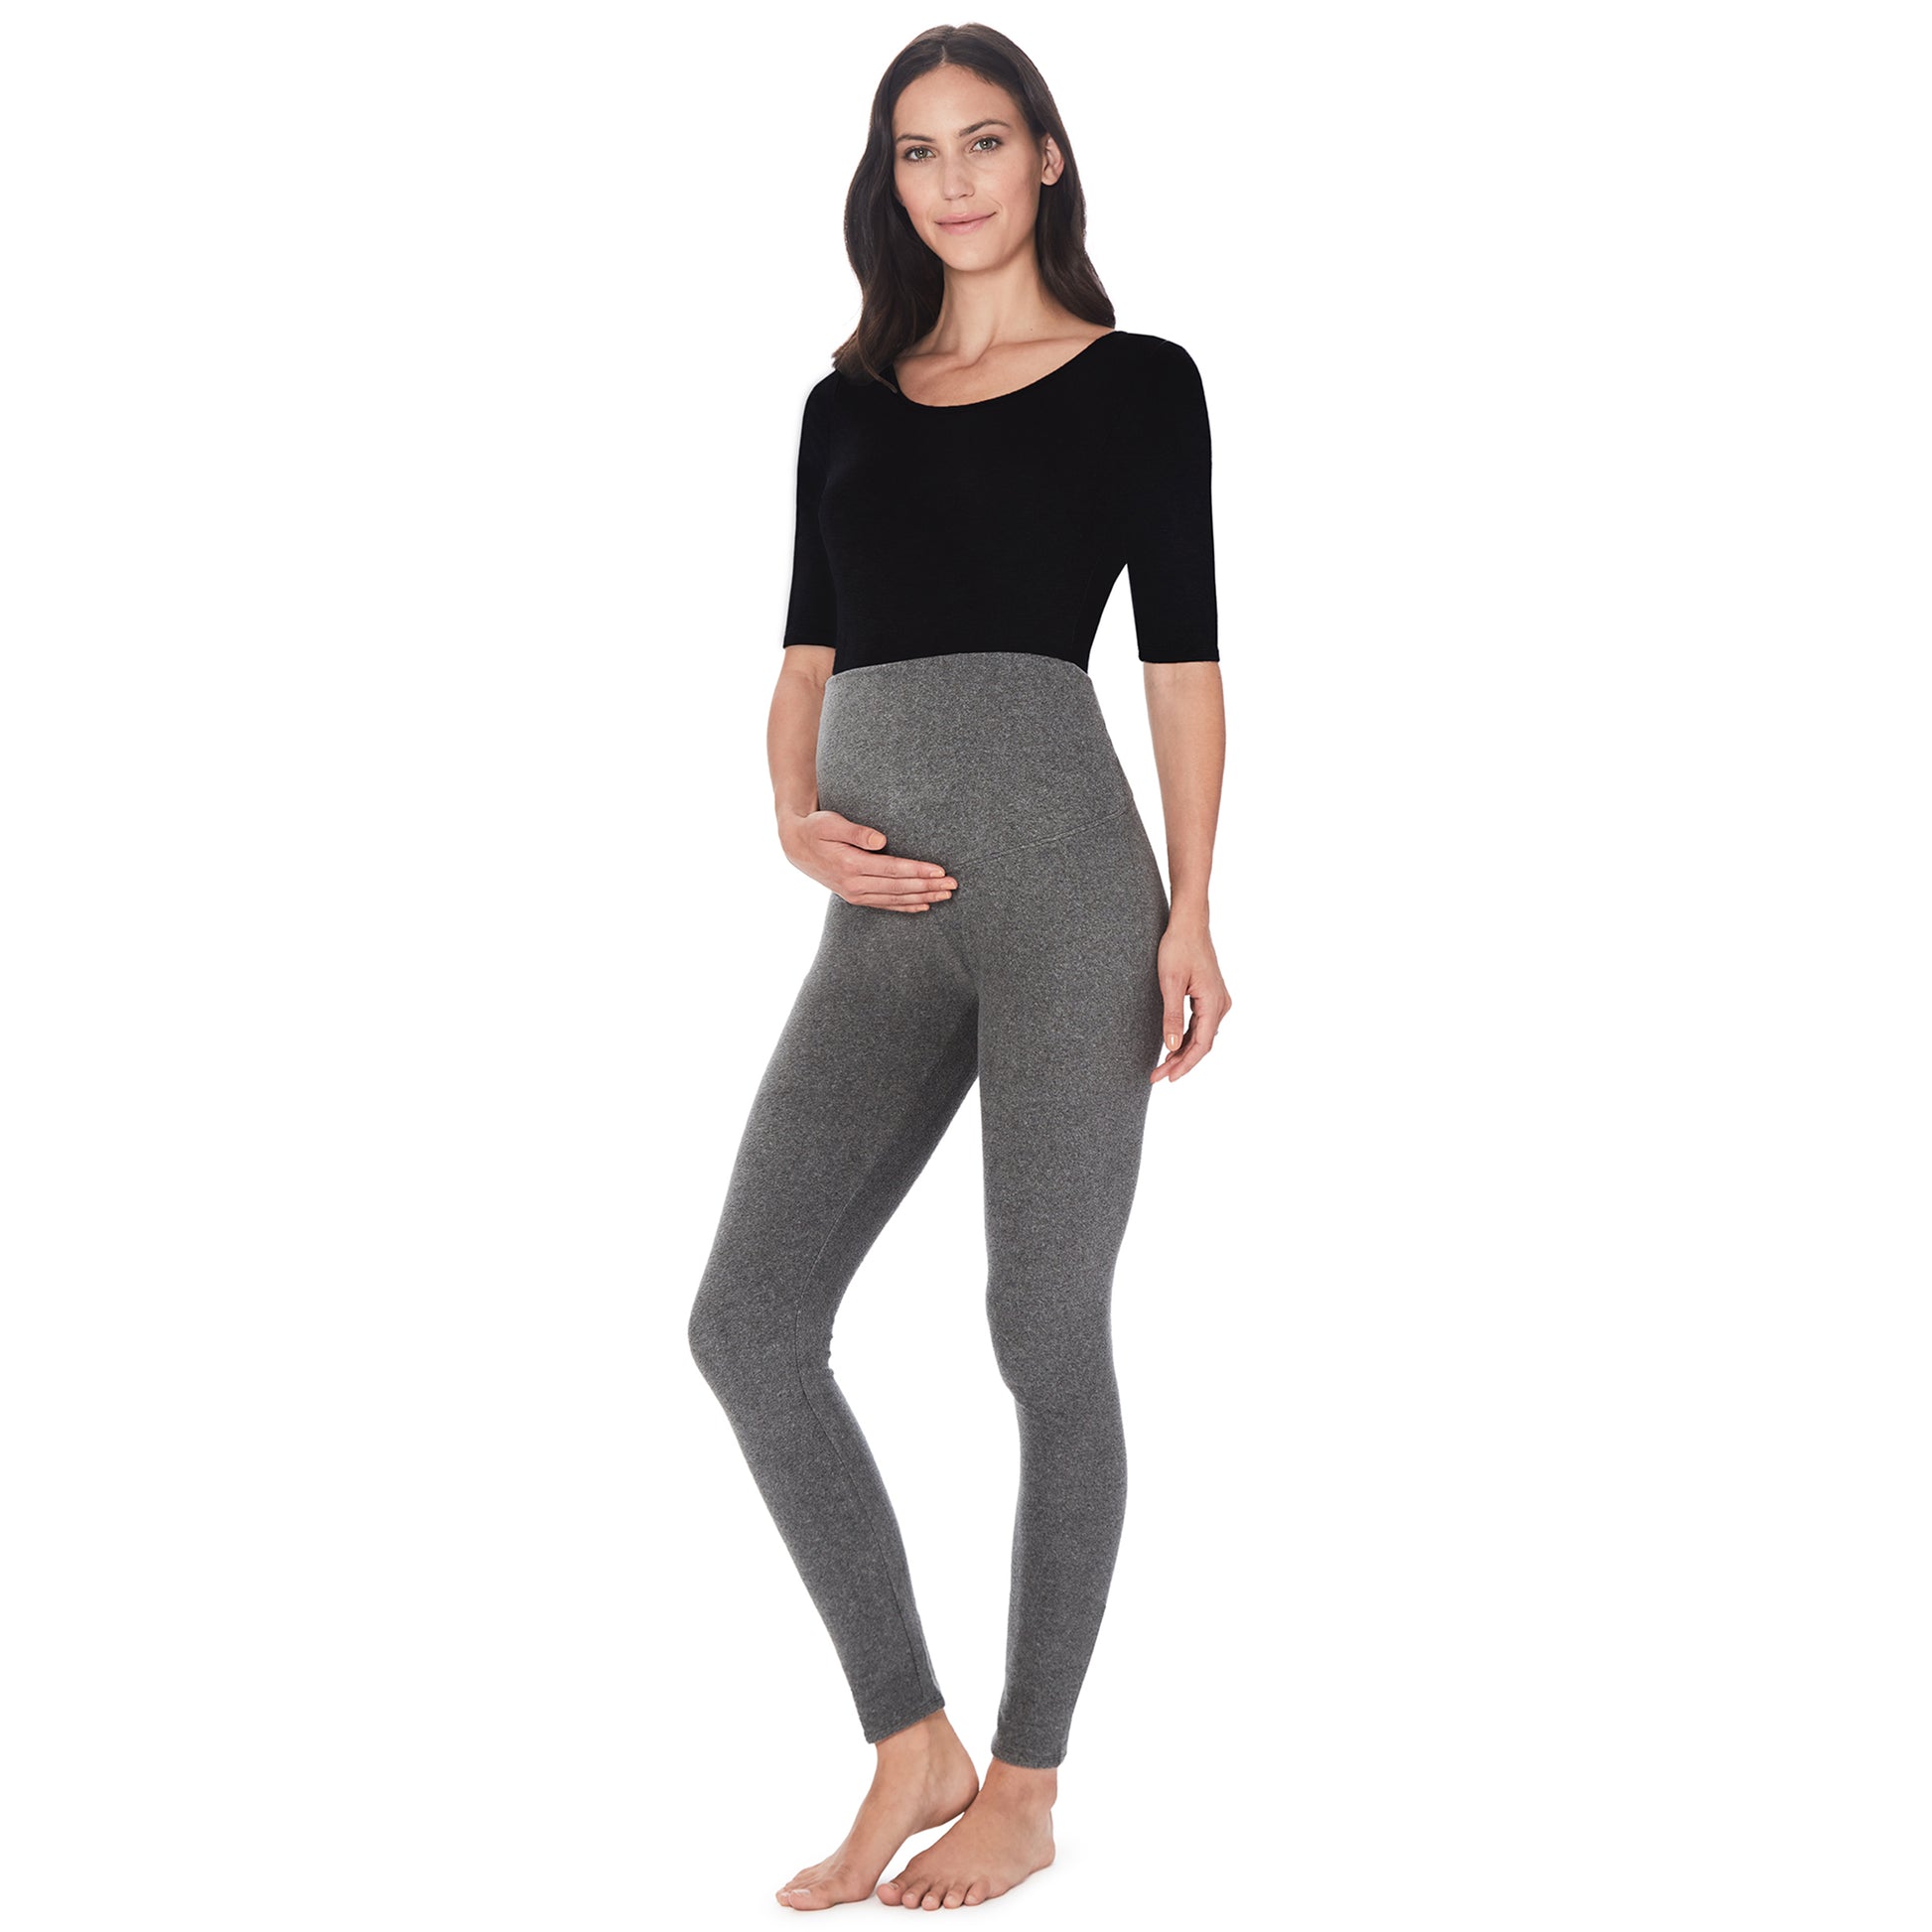 Charcoal Heather; Model is wearing size S. She is 5’9”, Bust 34”, Waist 24.5”, Hips 36.5”.@A lady wearing maternity legging #Model is wearing a grey maternity bump.